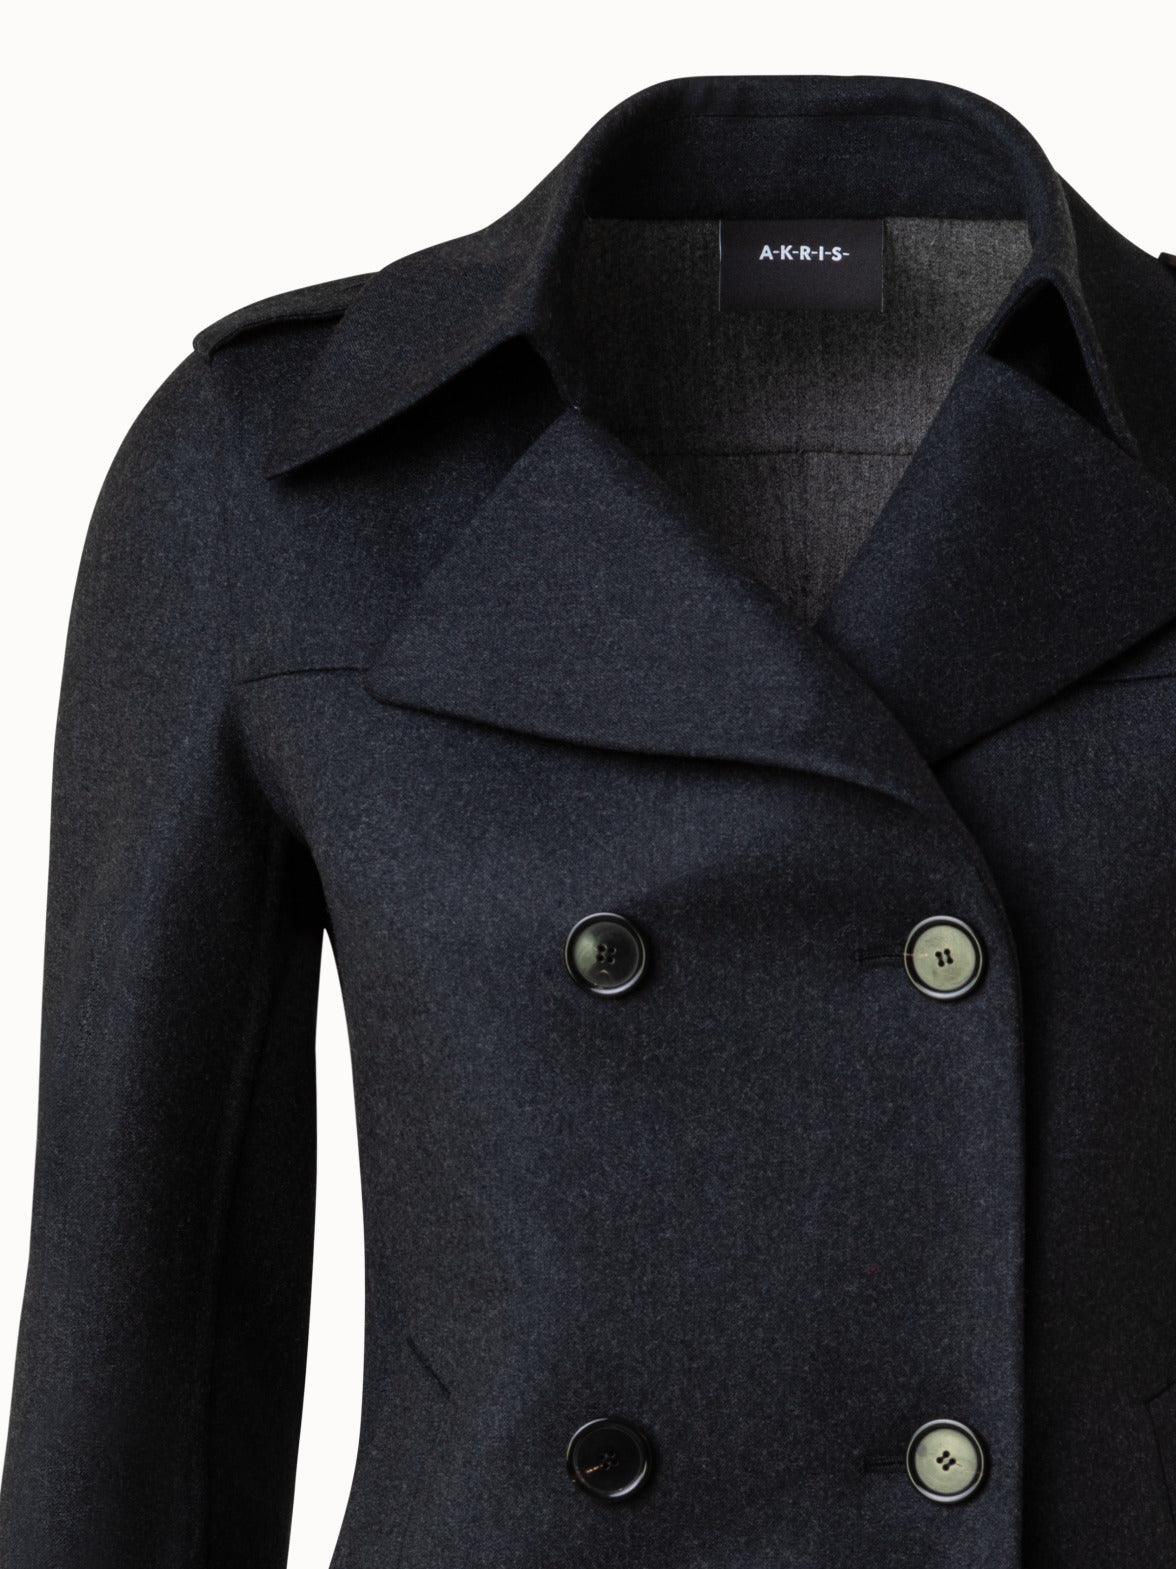 Wool Stretch Double-Face Peacoat